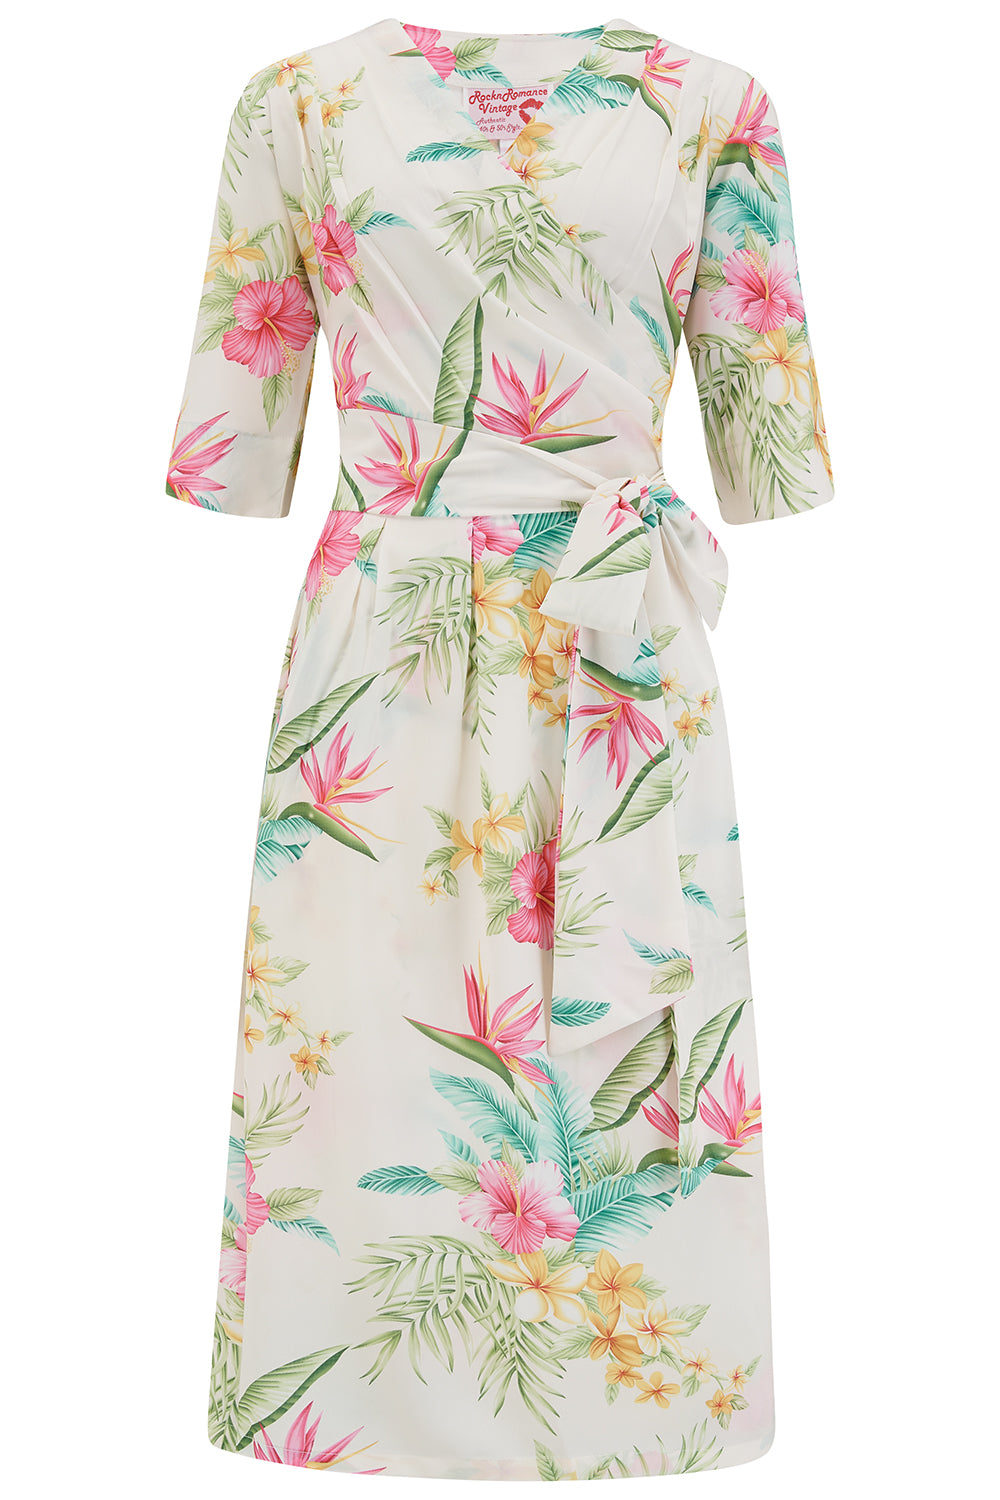 The "Vivien" Full Wrap Dress in Natural Honolulu, True 1940s To Early 1950s Style